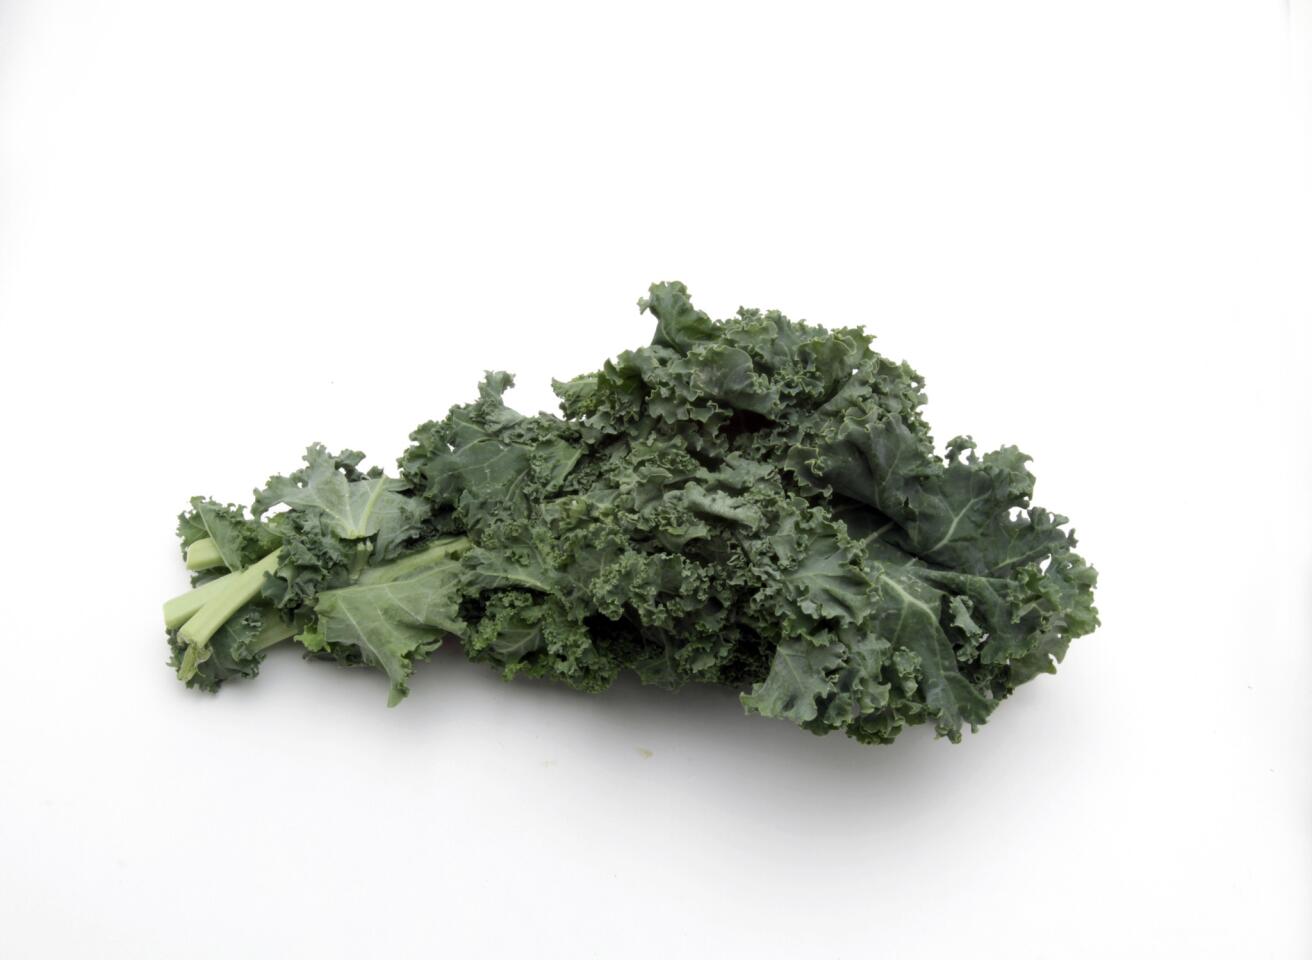 Today's darling salad green has always been one of the best cooking greens. The flavor mellows nicely; the texture is tender. Befitting its star status, there is a variety of kale available today, and the darkest tend to be the best flavored.